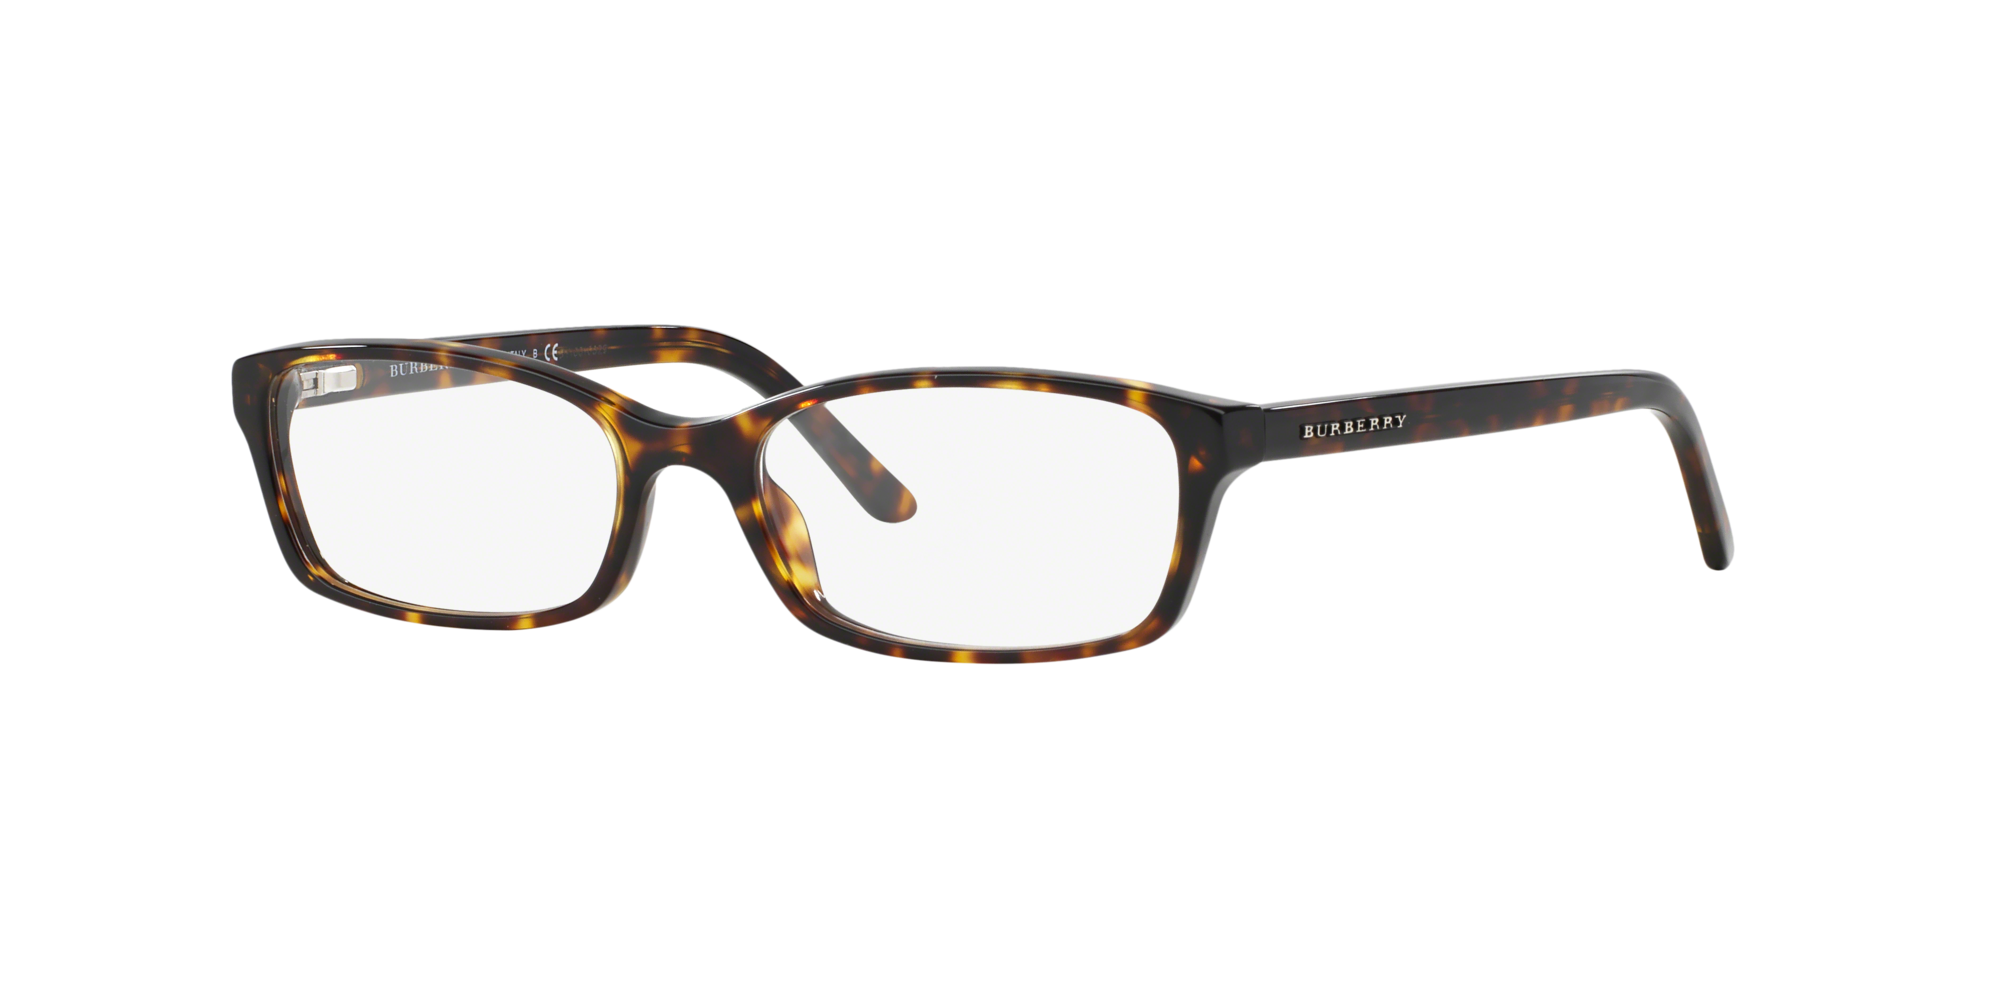 burberry glasses lenscrafters